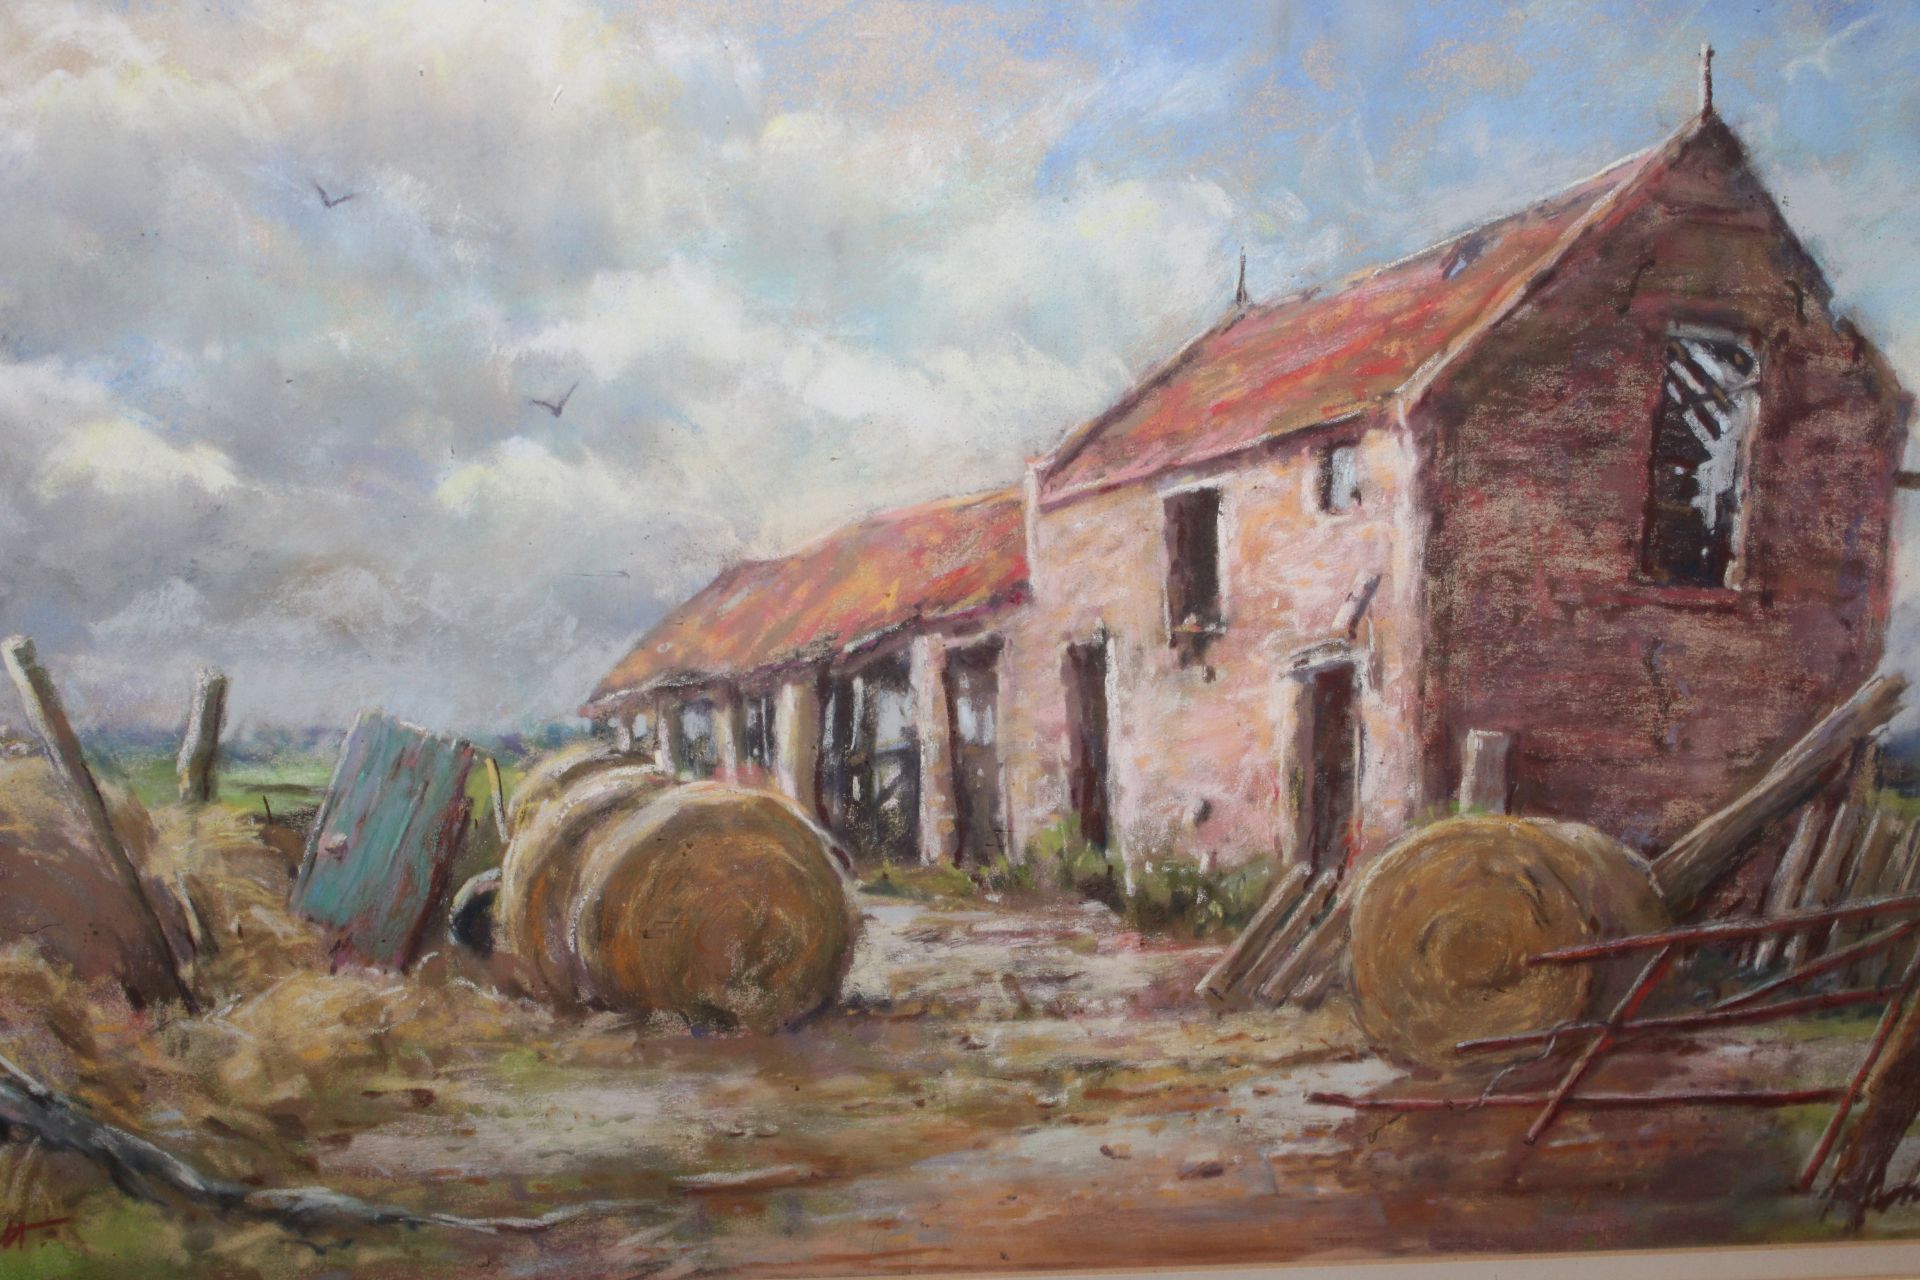 John Patchett, "Old Farmyard" signed and dated 199 - Image 2 of 3